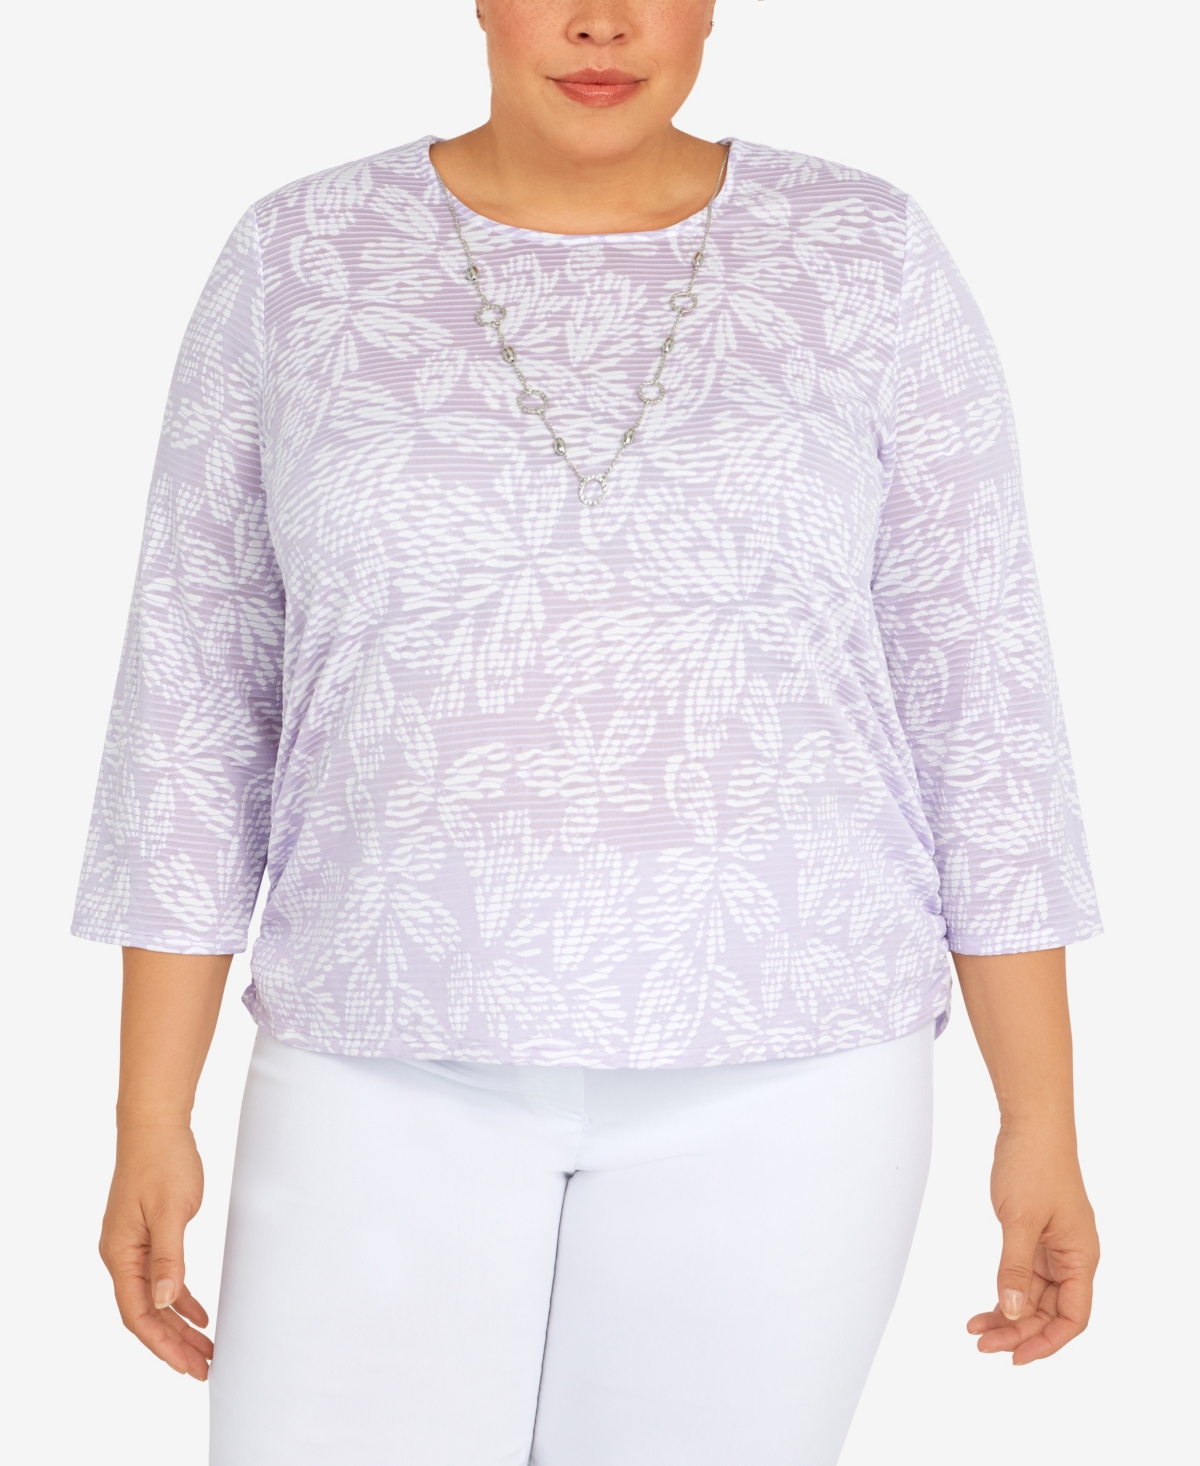 Alfred Dunner Plus Size Classic Floral Jacquard Butterfly Knit Top With Necklace In Lilac